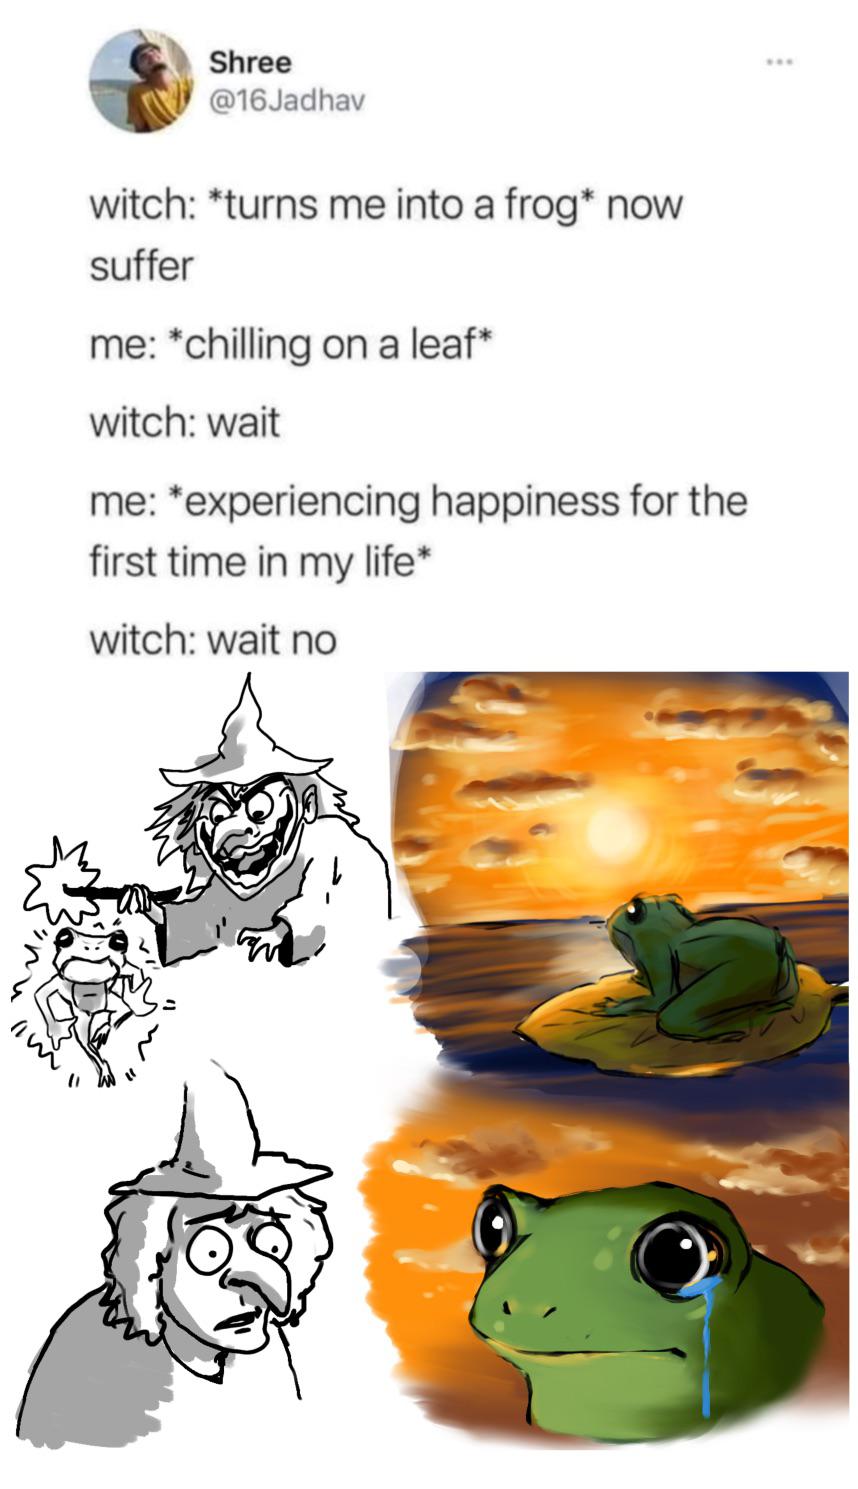 cartoon - Shree witch turns me into a frog now suffer me chilling on a leaf witch wait me experiencing happiness for the first time in my life witch wait no